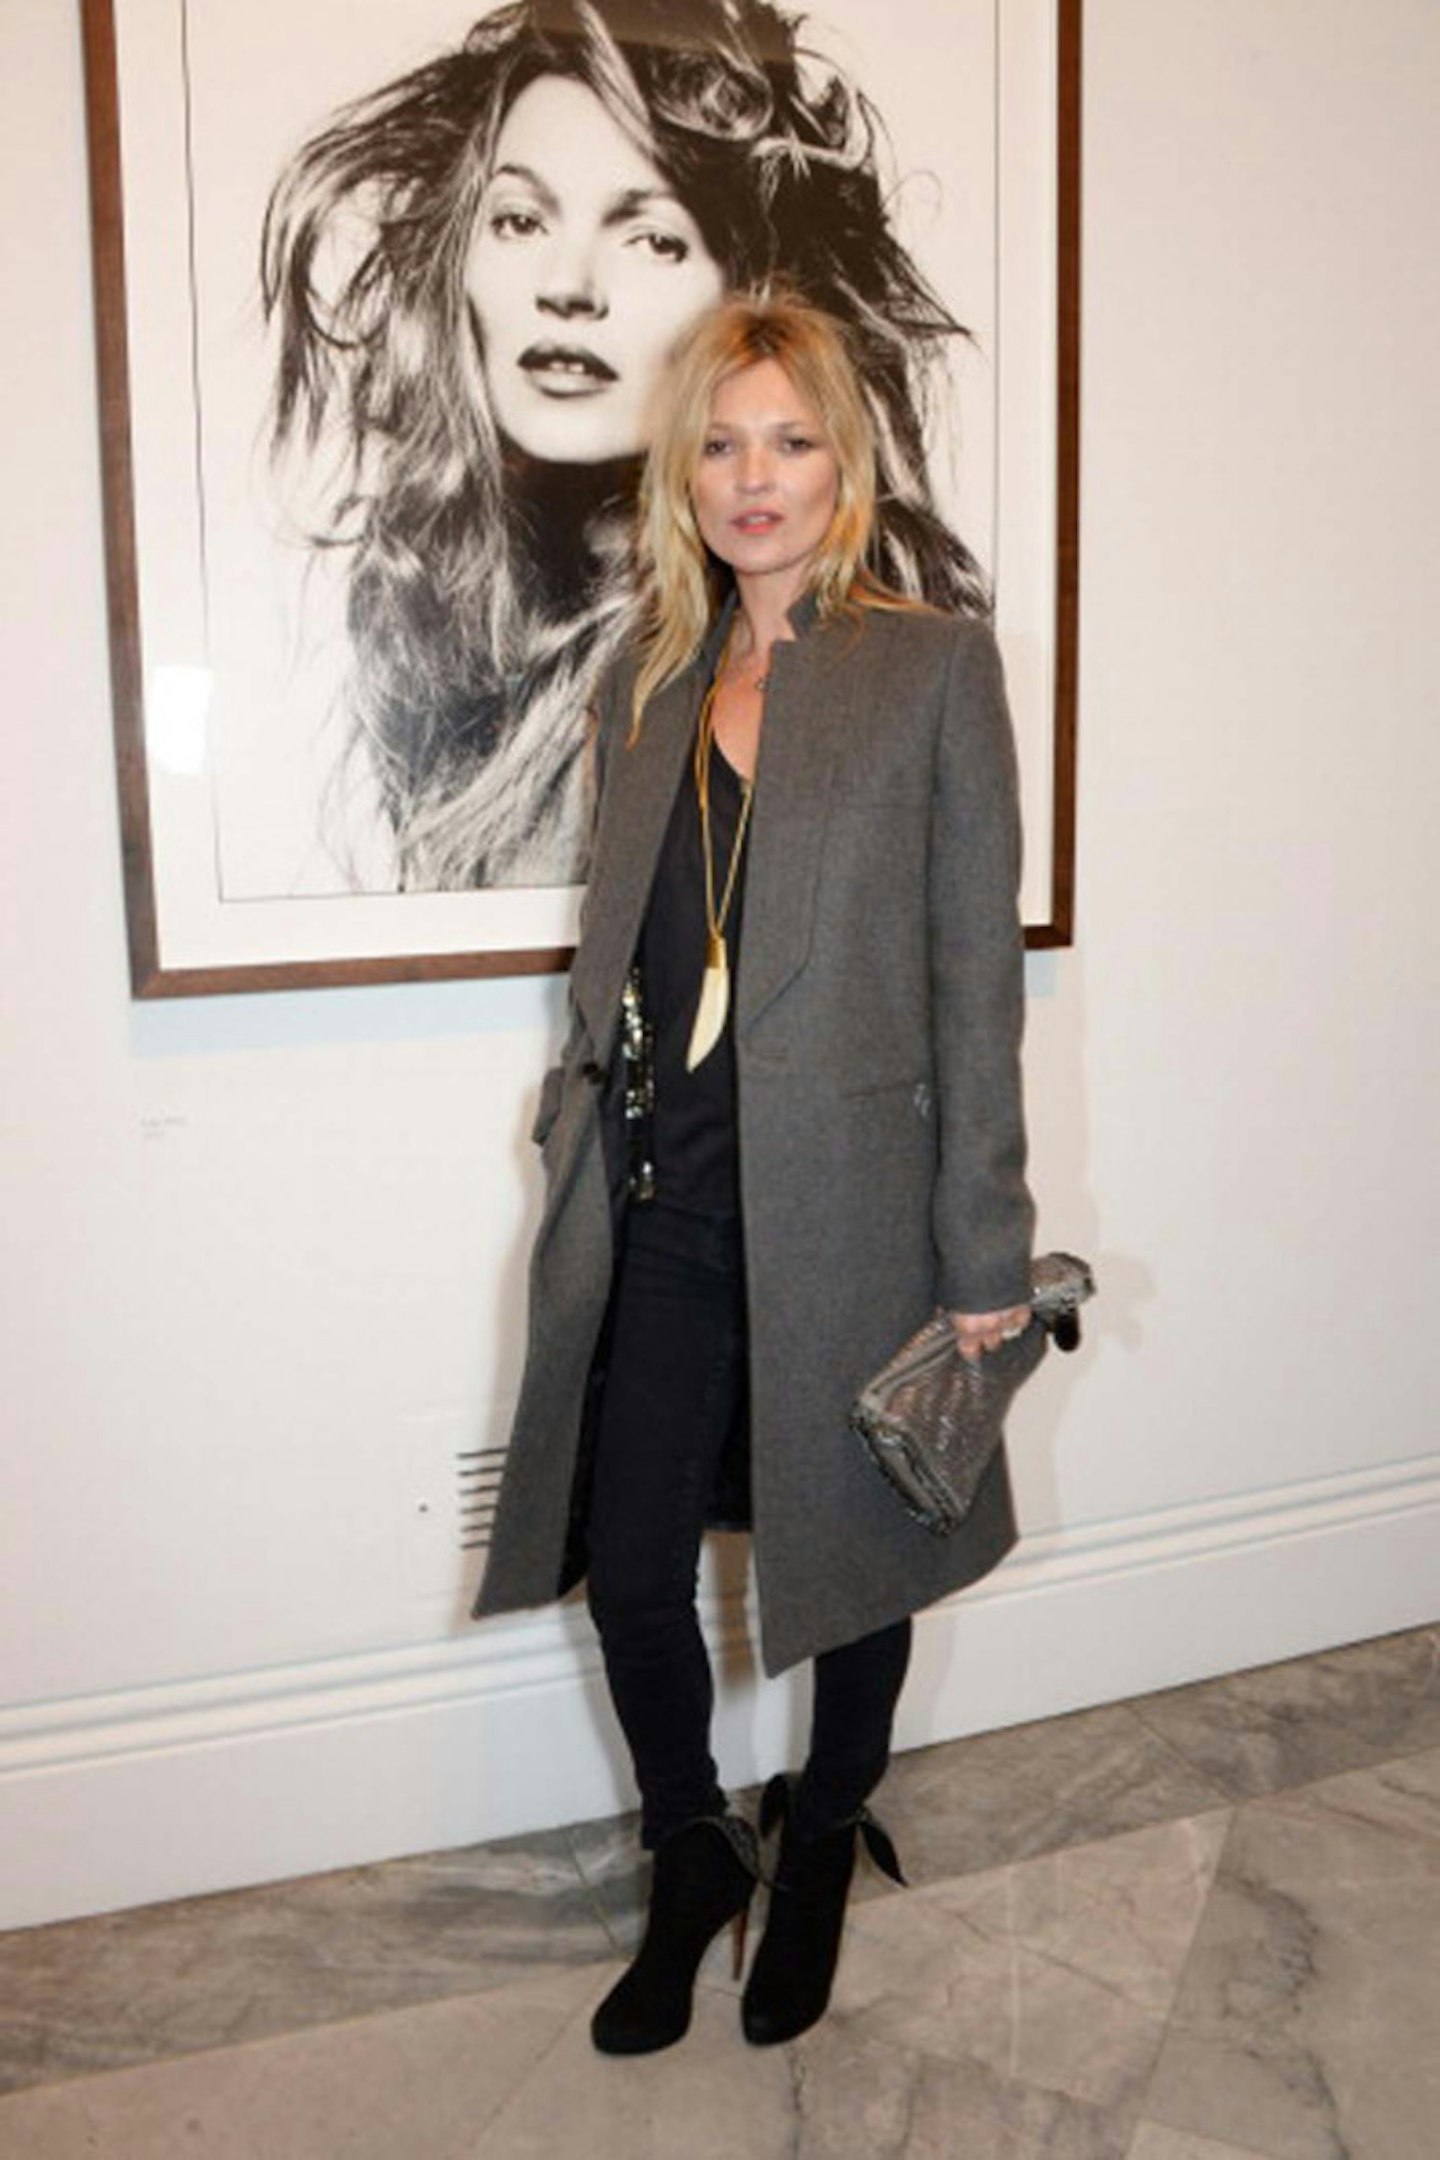 Kate Moss attends a private view of Bailey's Stardust, a exhibition of images by David Bailey supported by Hugo Boss, at the National Portrait Gallery, 3 February 2014